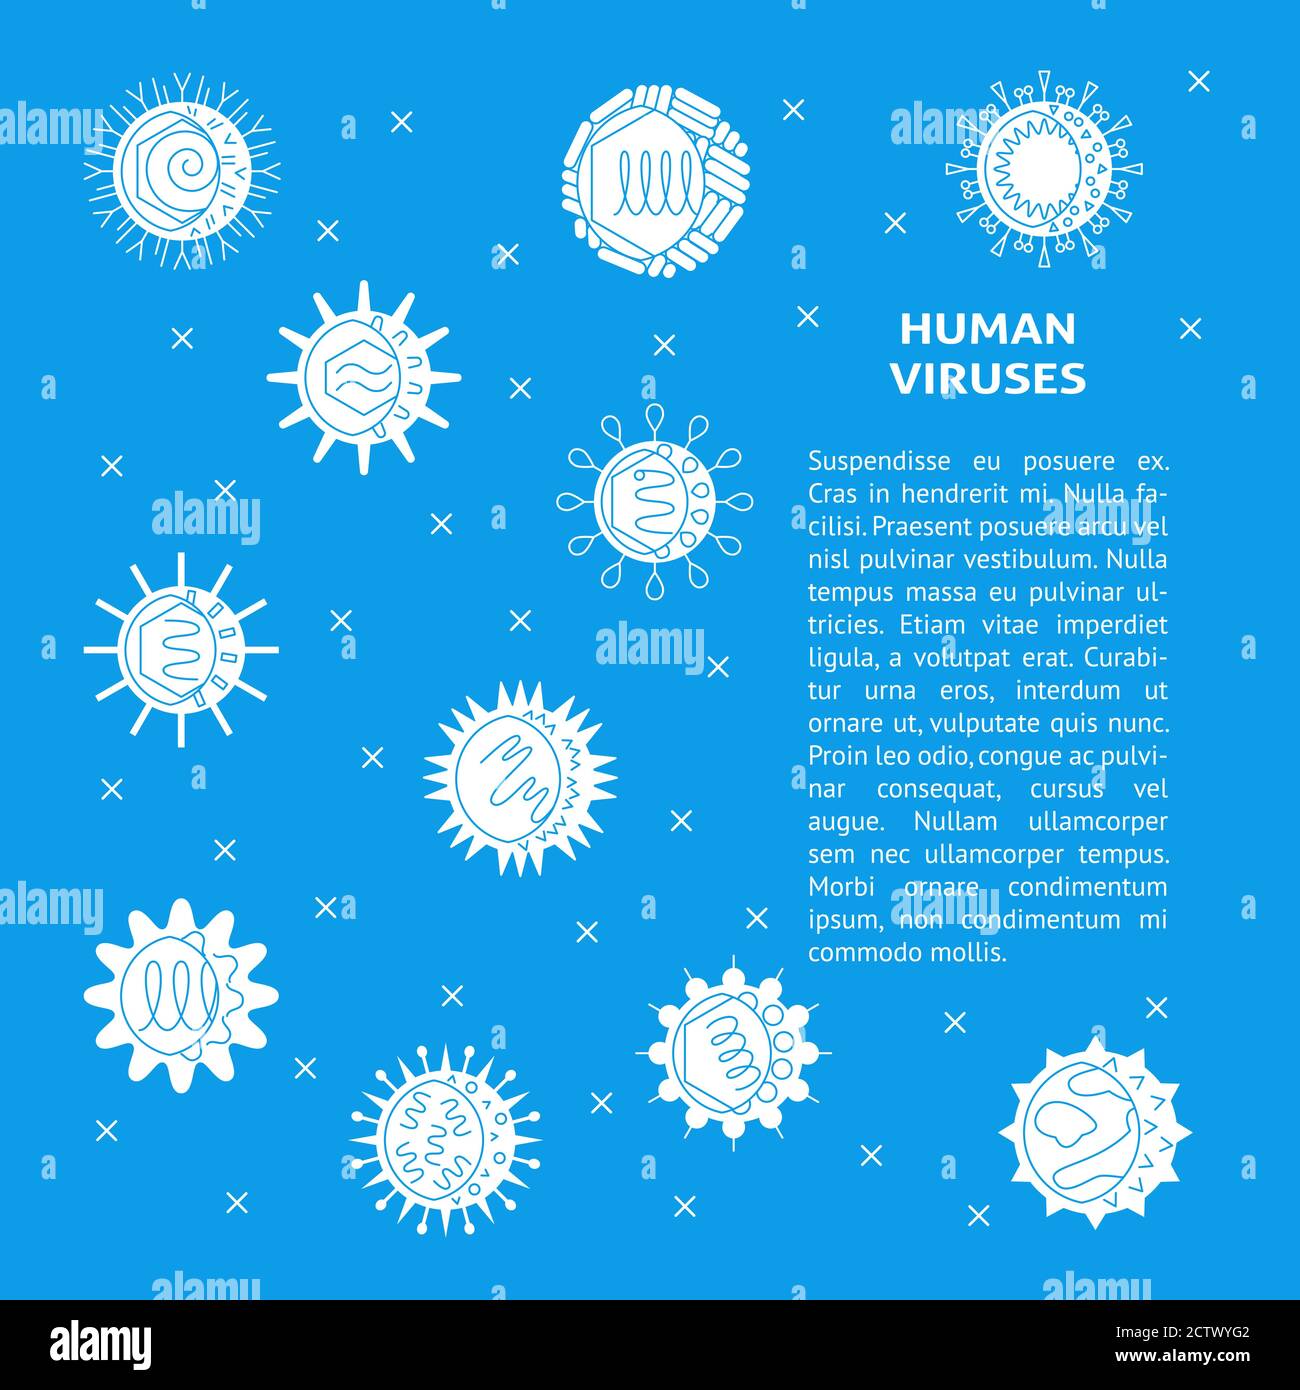 Human viruses concept banner with place for text Stock Vector